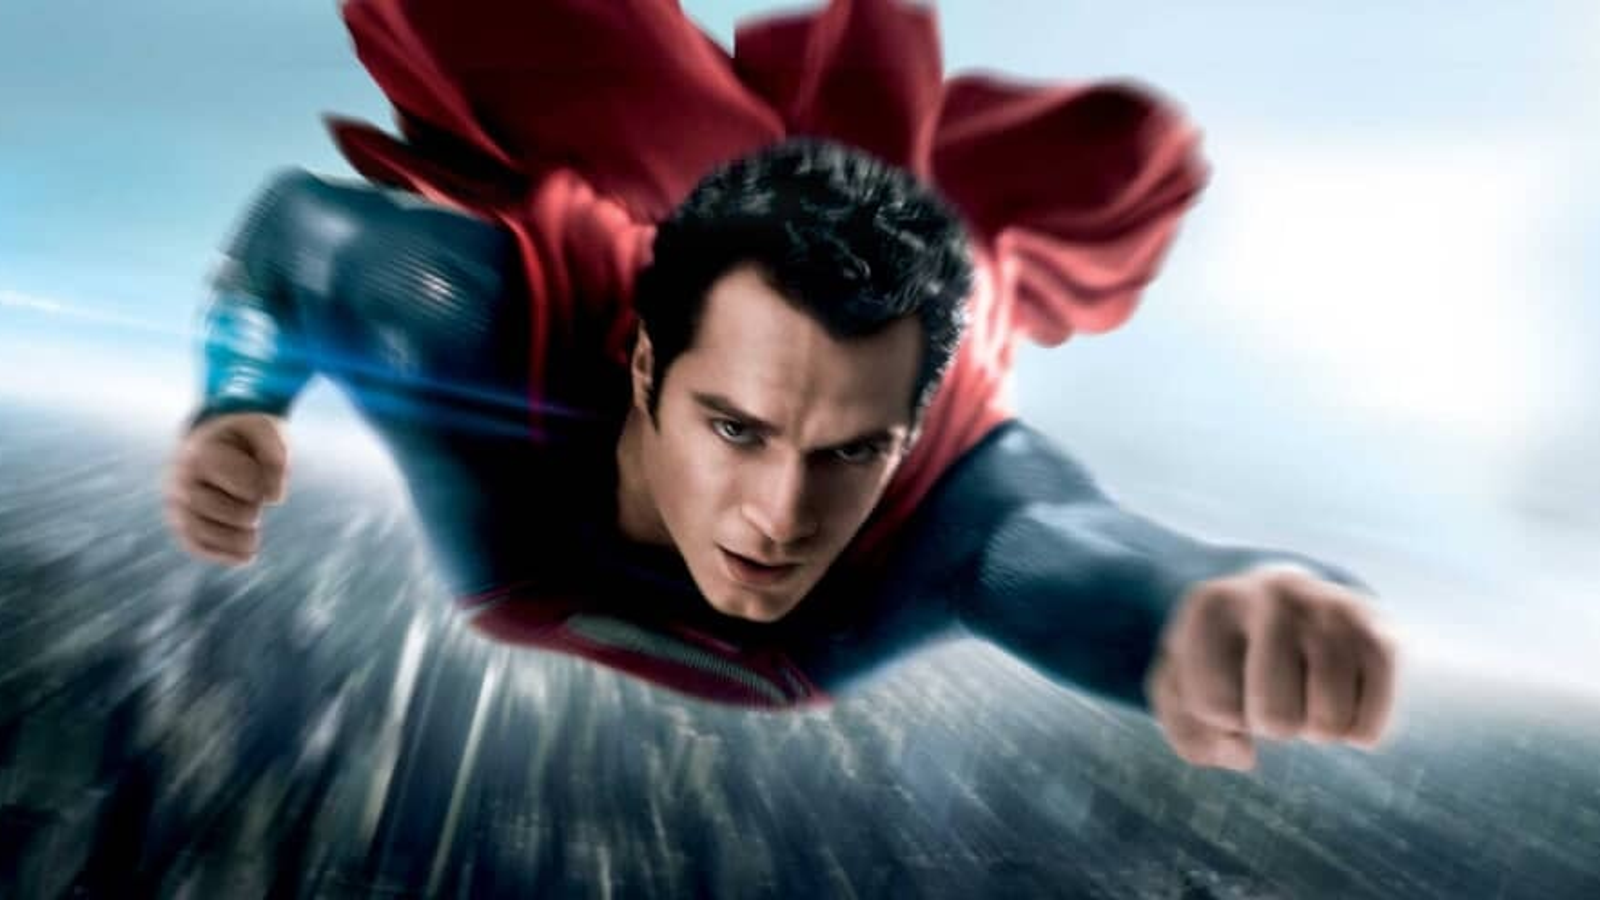 Henry Cavill confirms that he's definitely back as DC's Man of Steel